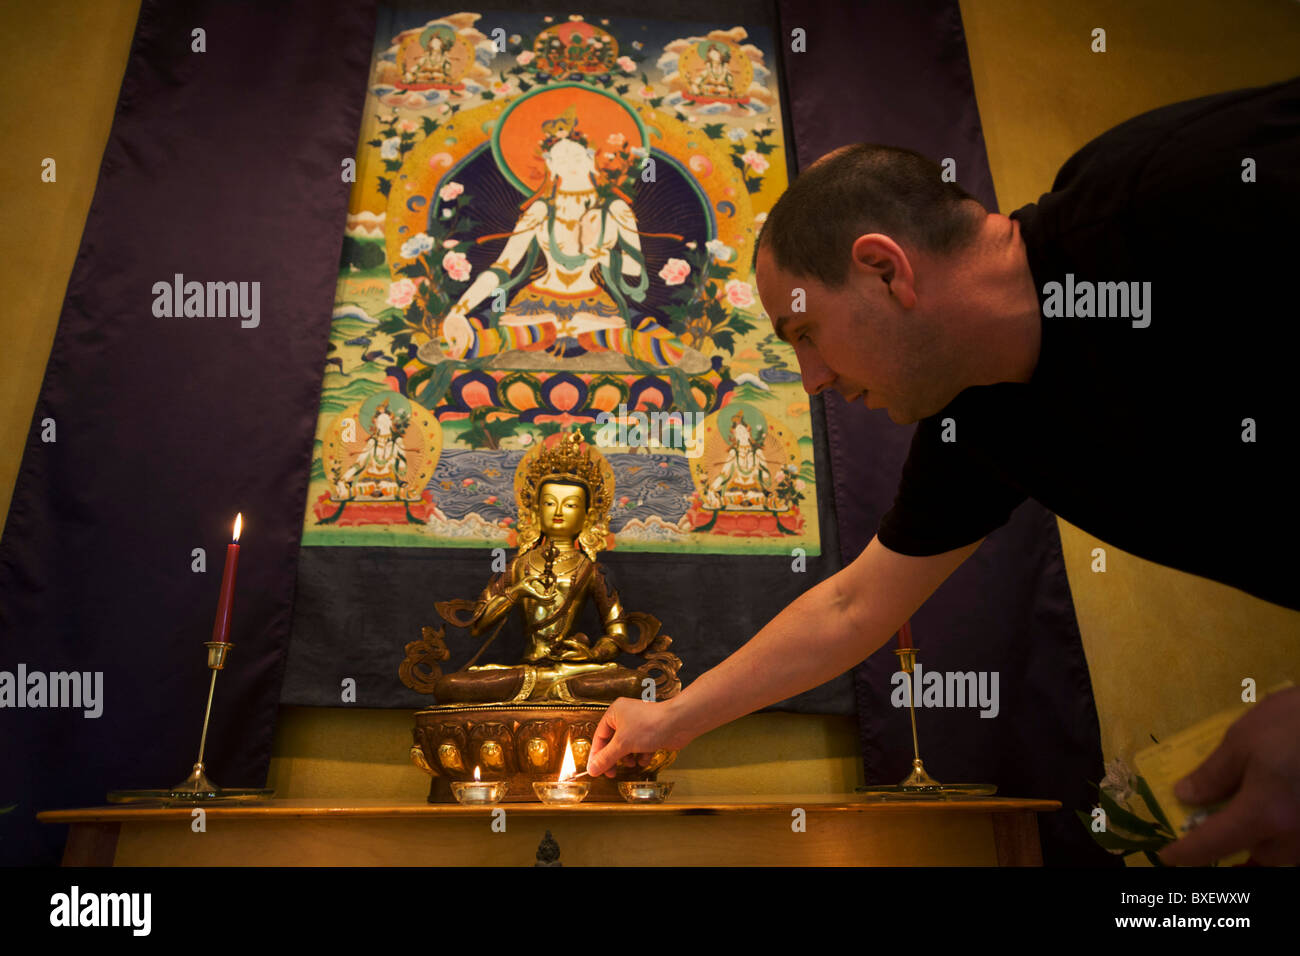 The Buddhist monk Nagasiddhi lights candles in the Shrine Room at the Rivendell Buddhist Retreat Centre, East Sussex, England. Stock Photo